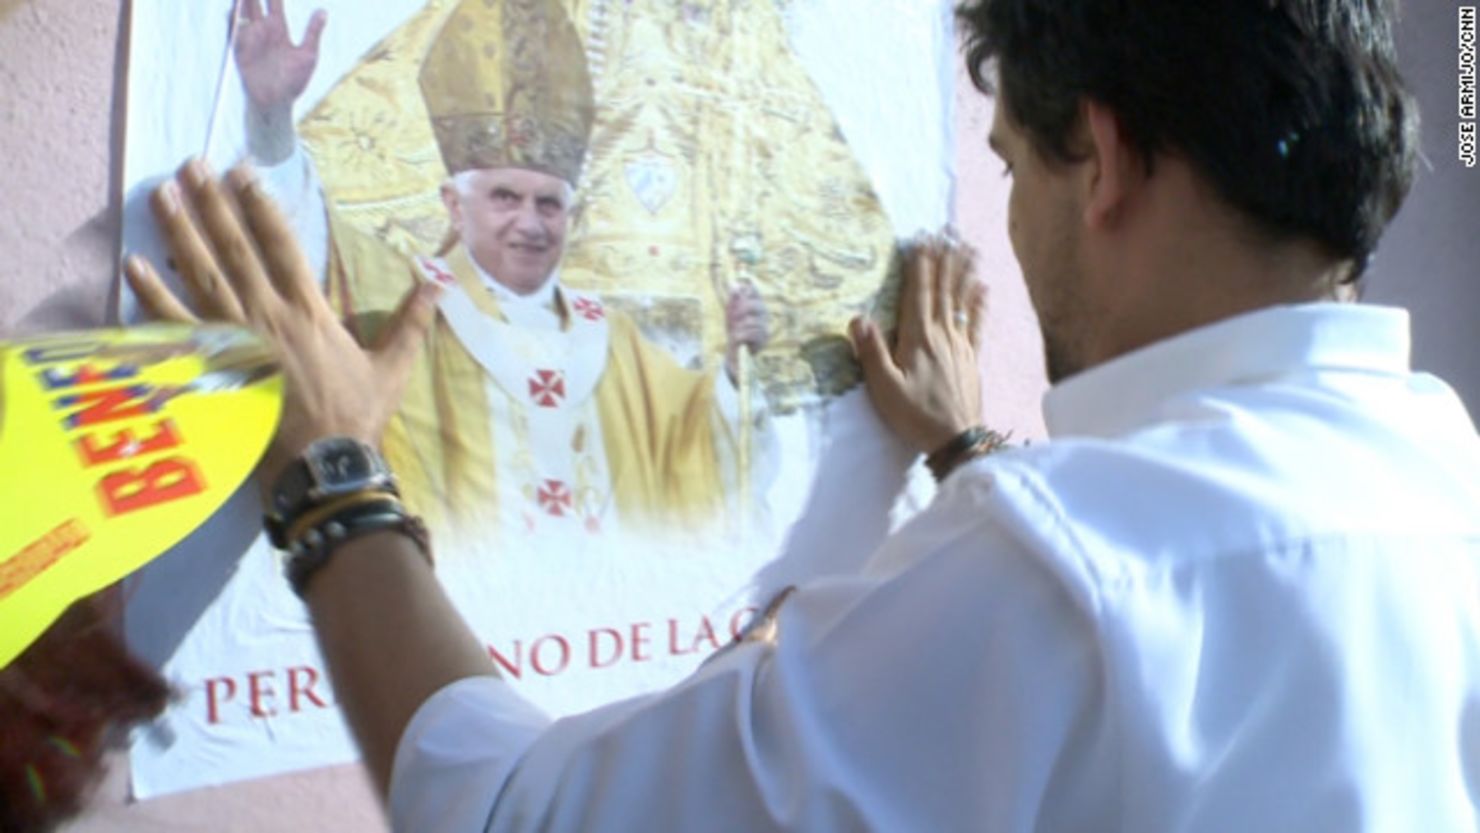 Pope Benedict said last week that Cuba's Marxist political system "no longer corresponds to reality."